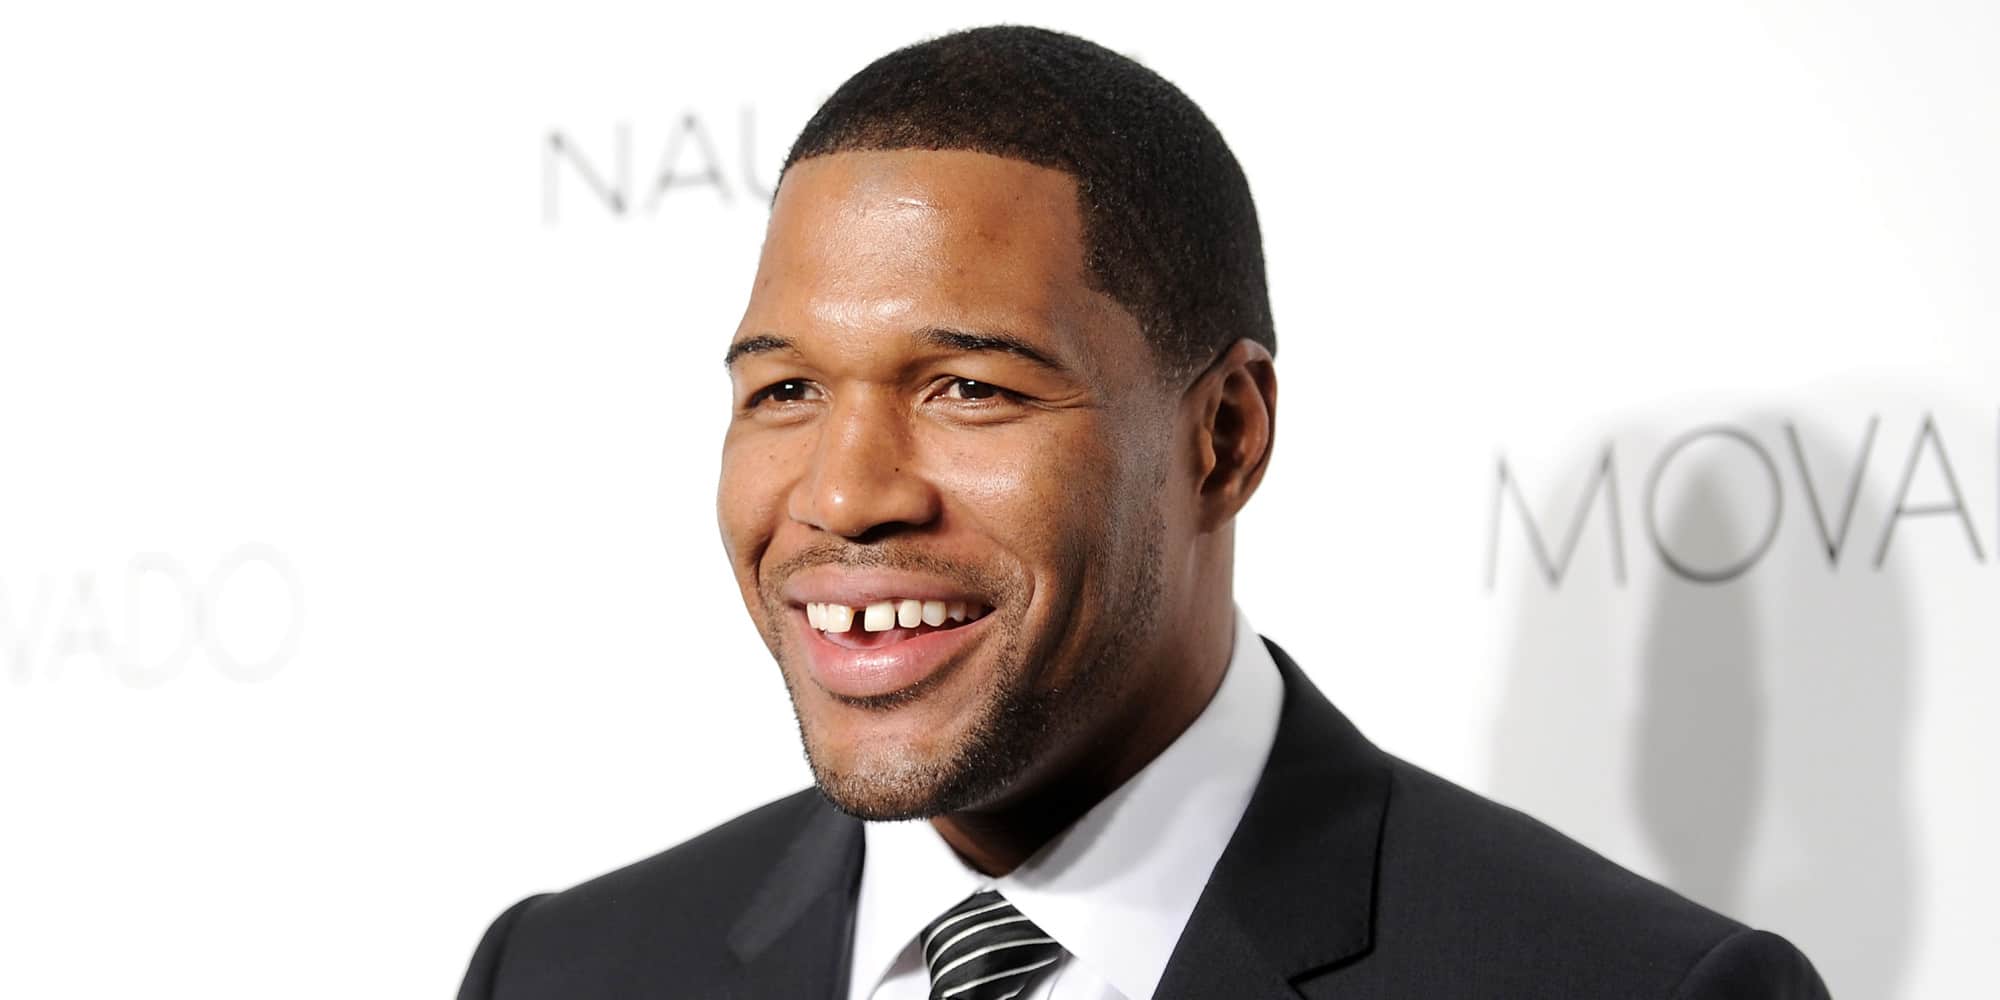 What is Michael Strahan's salary?